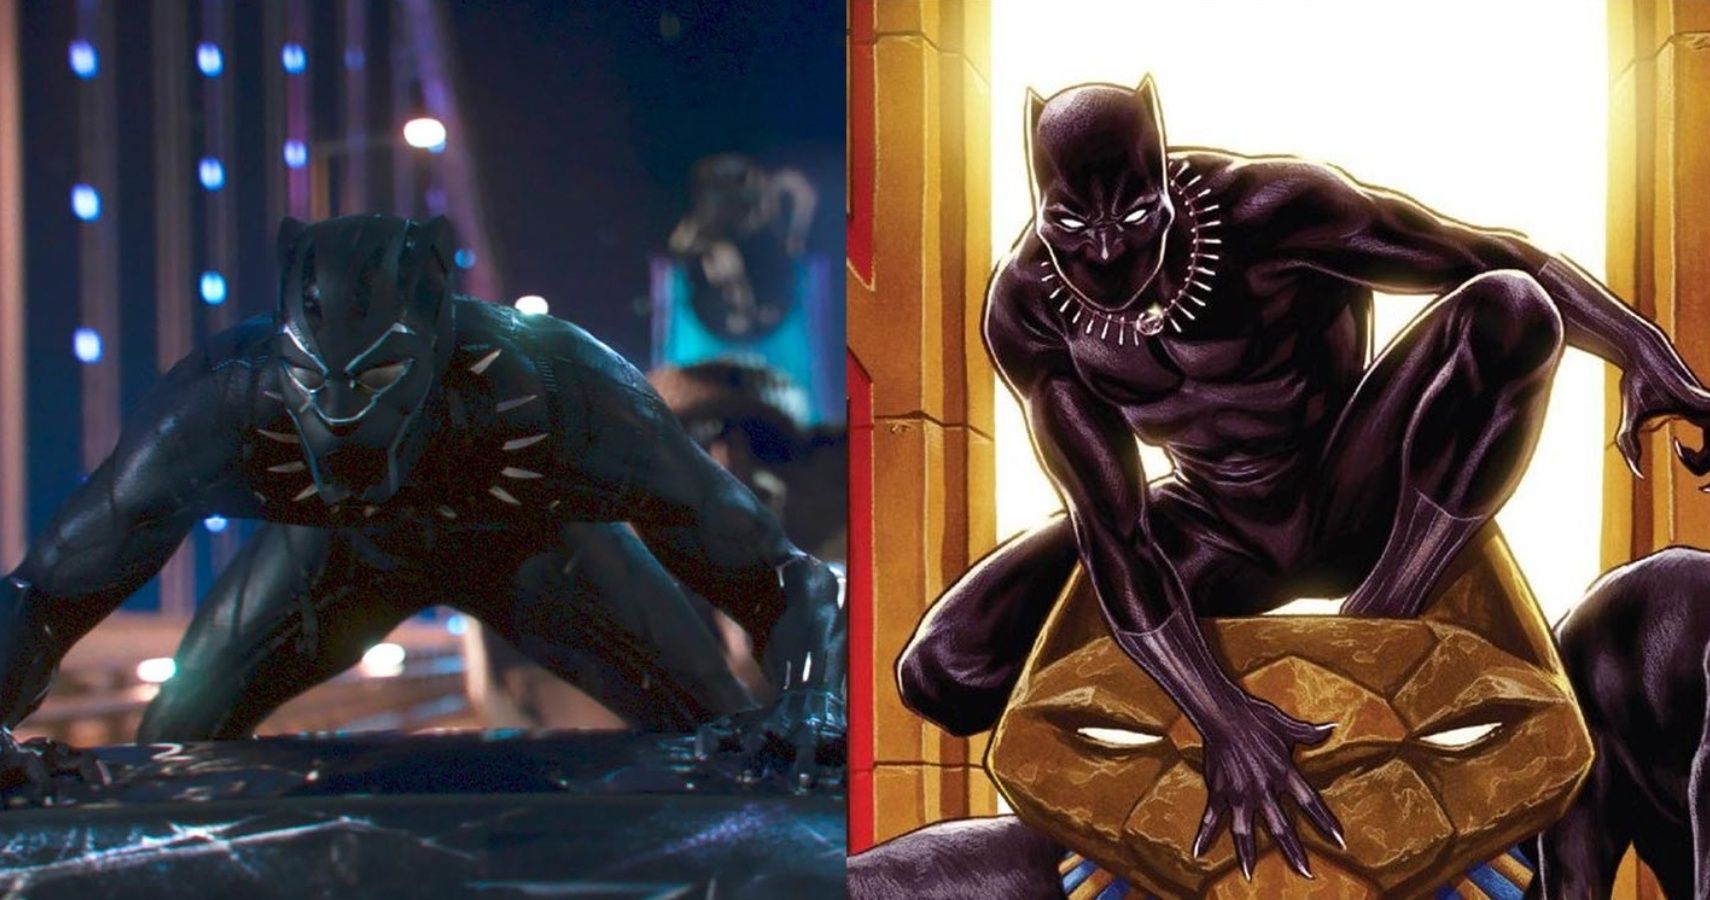 Who Will Be The Black Panther of Earth-838 - Illuminati